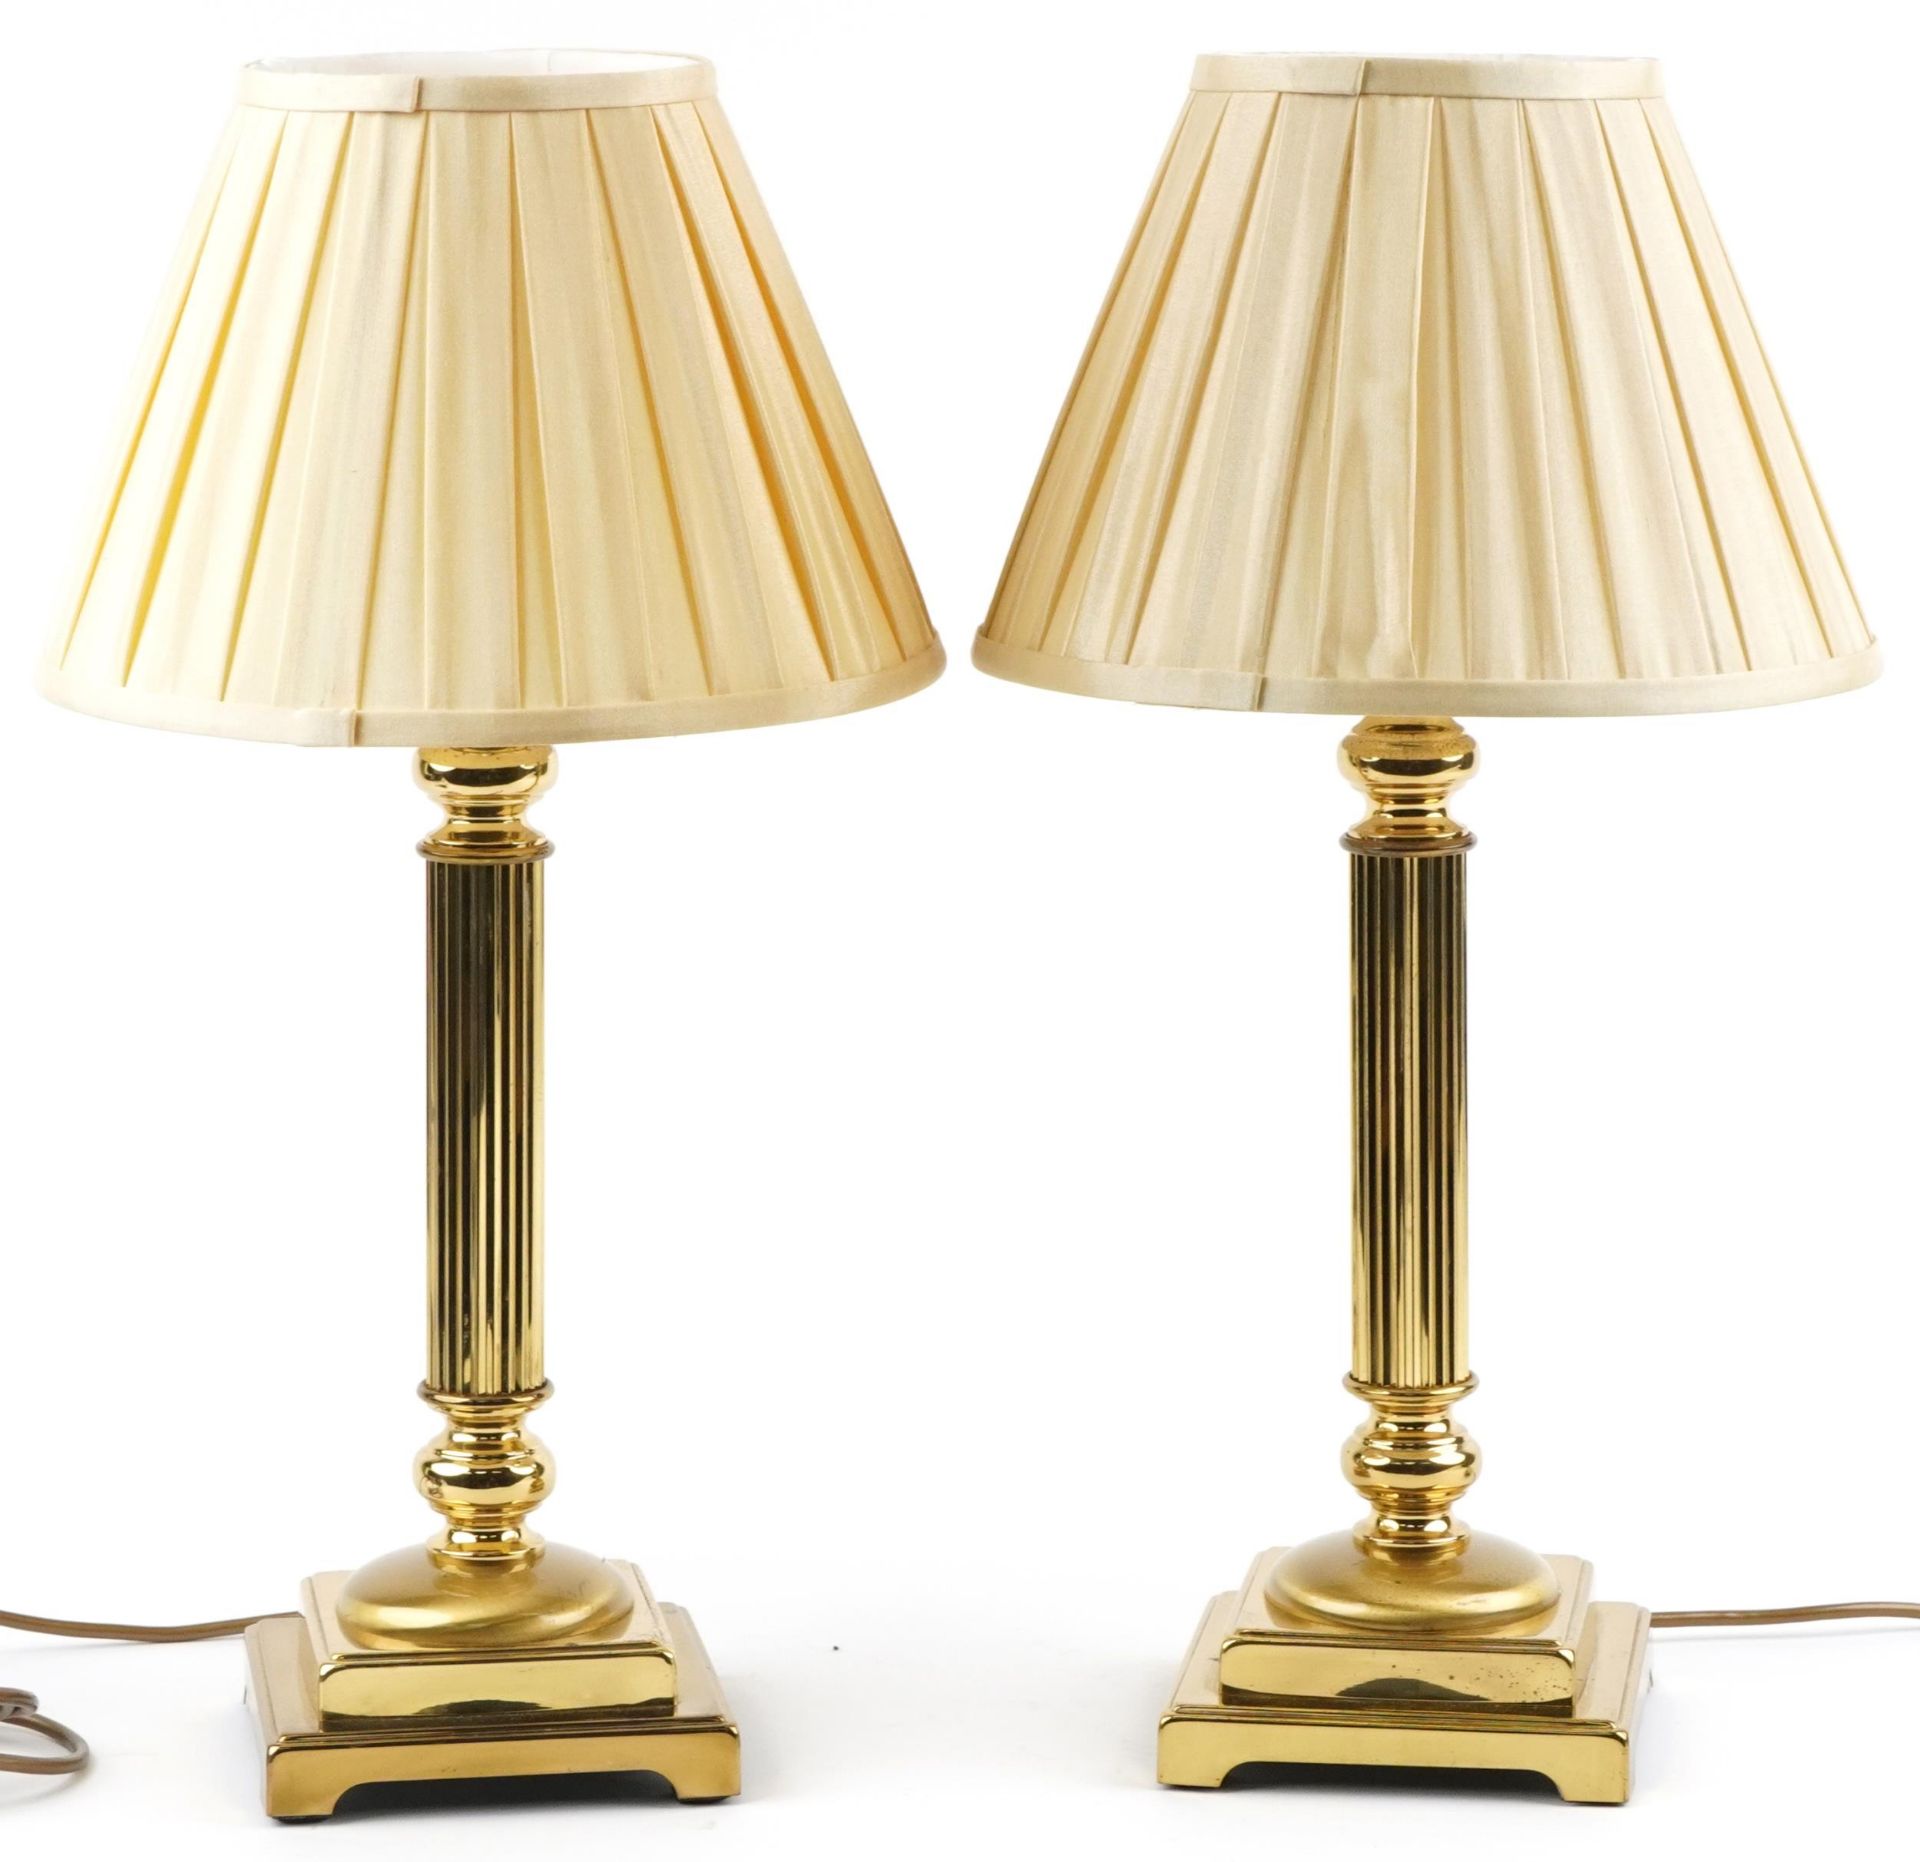 Pair of classical brass Corinthian column table lamps with stepped square bases and silk lined